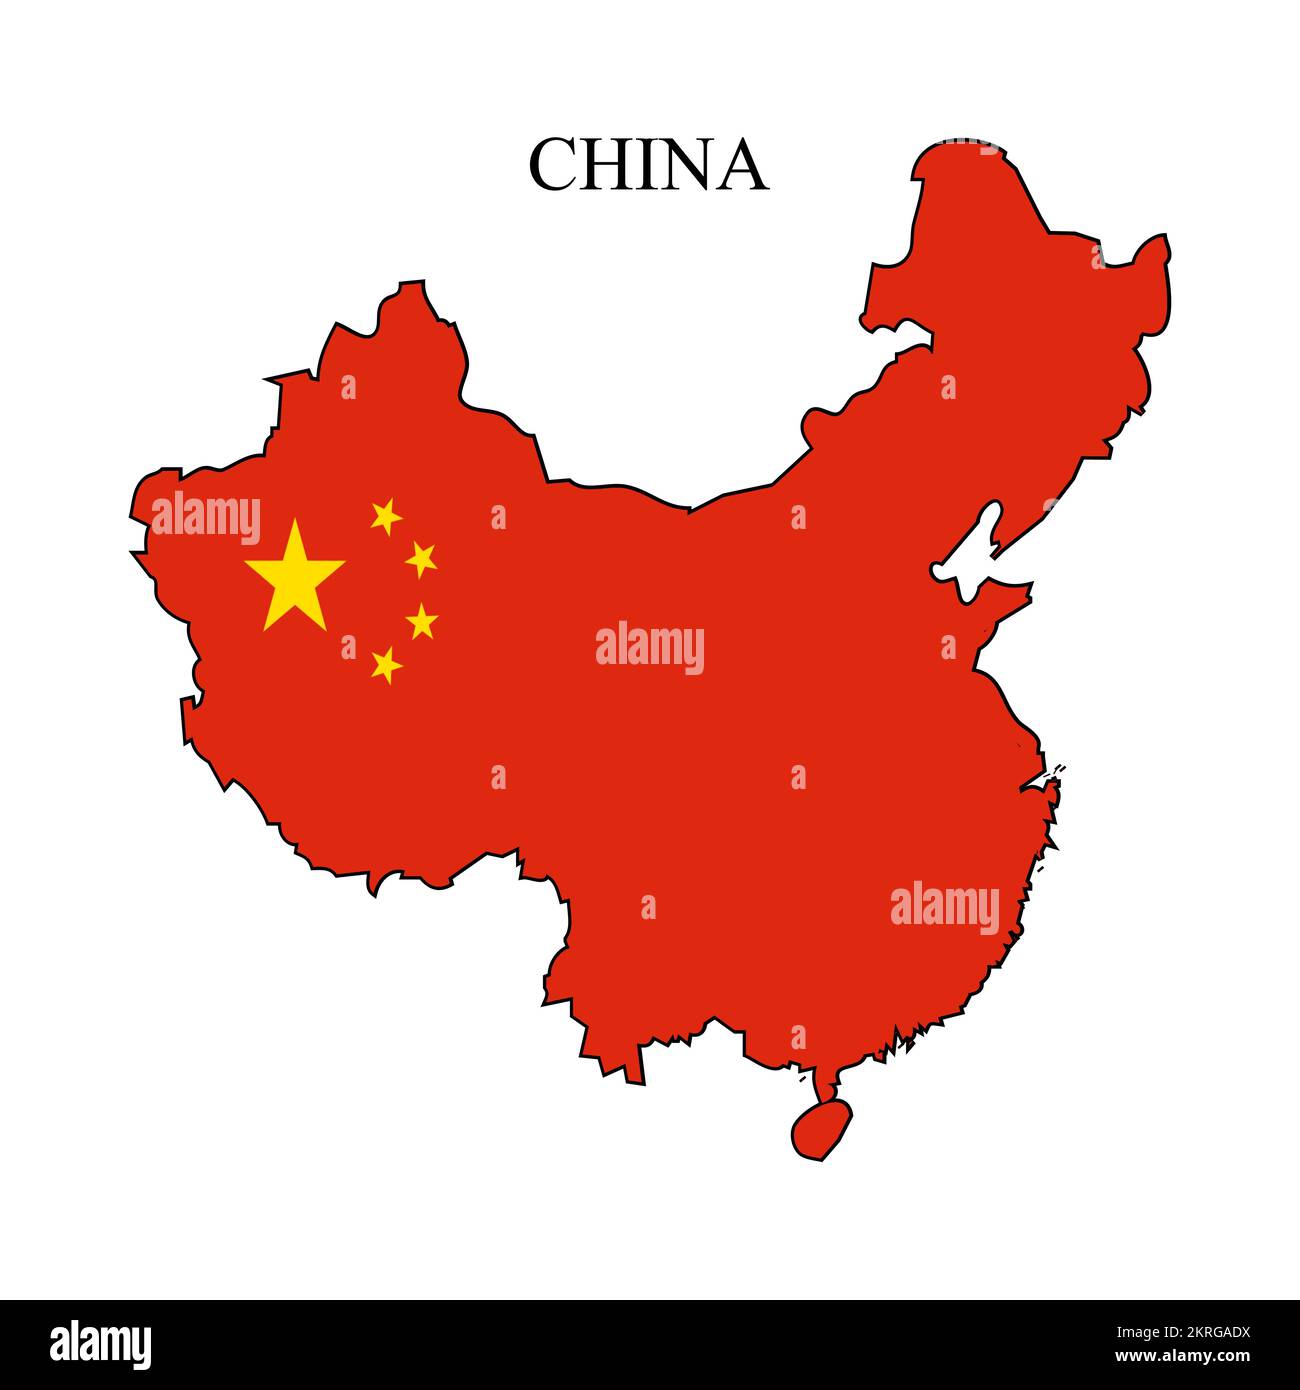 China map vector illustration. Global economy. Famous country. Eastern Asia Stock Vector